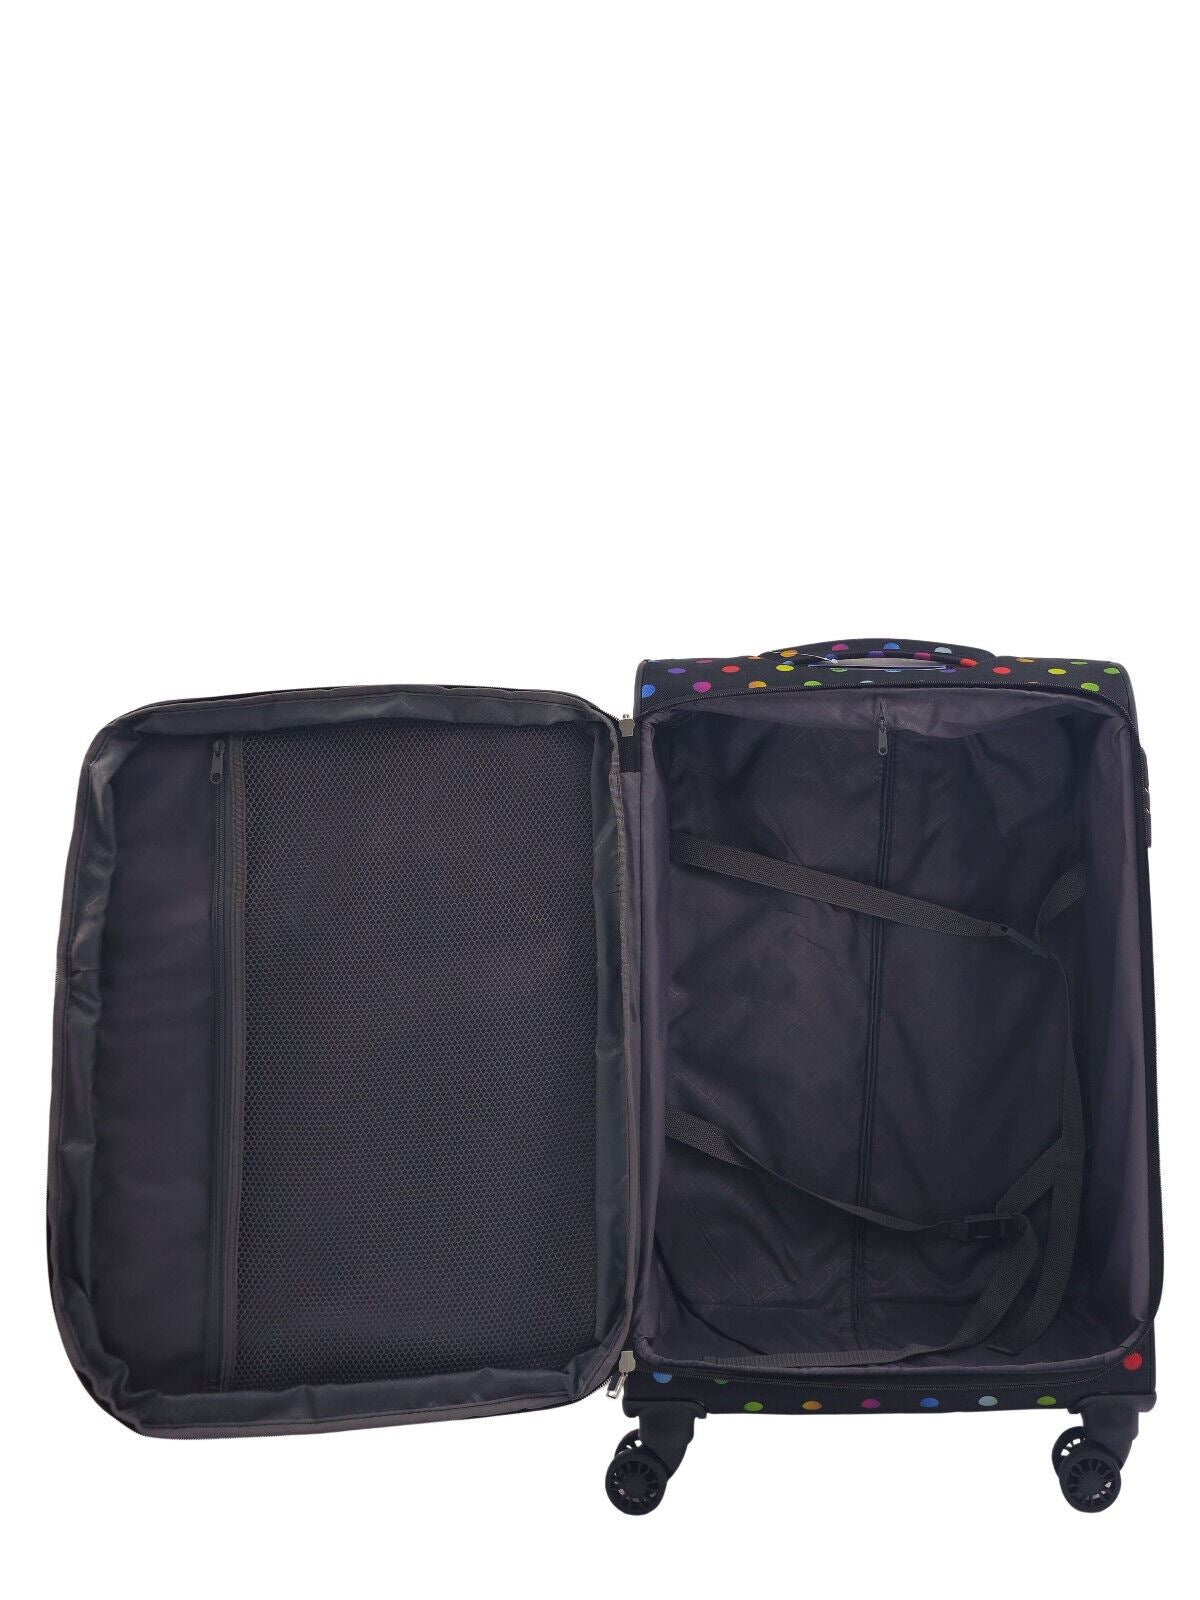 Ashville Large Soft Shell Suitcase in Dots